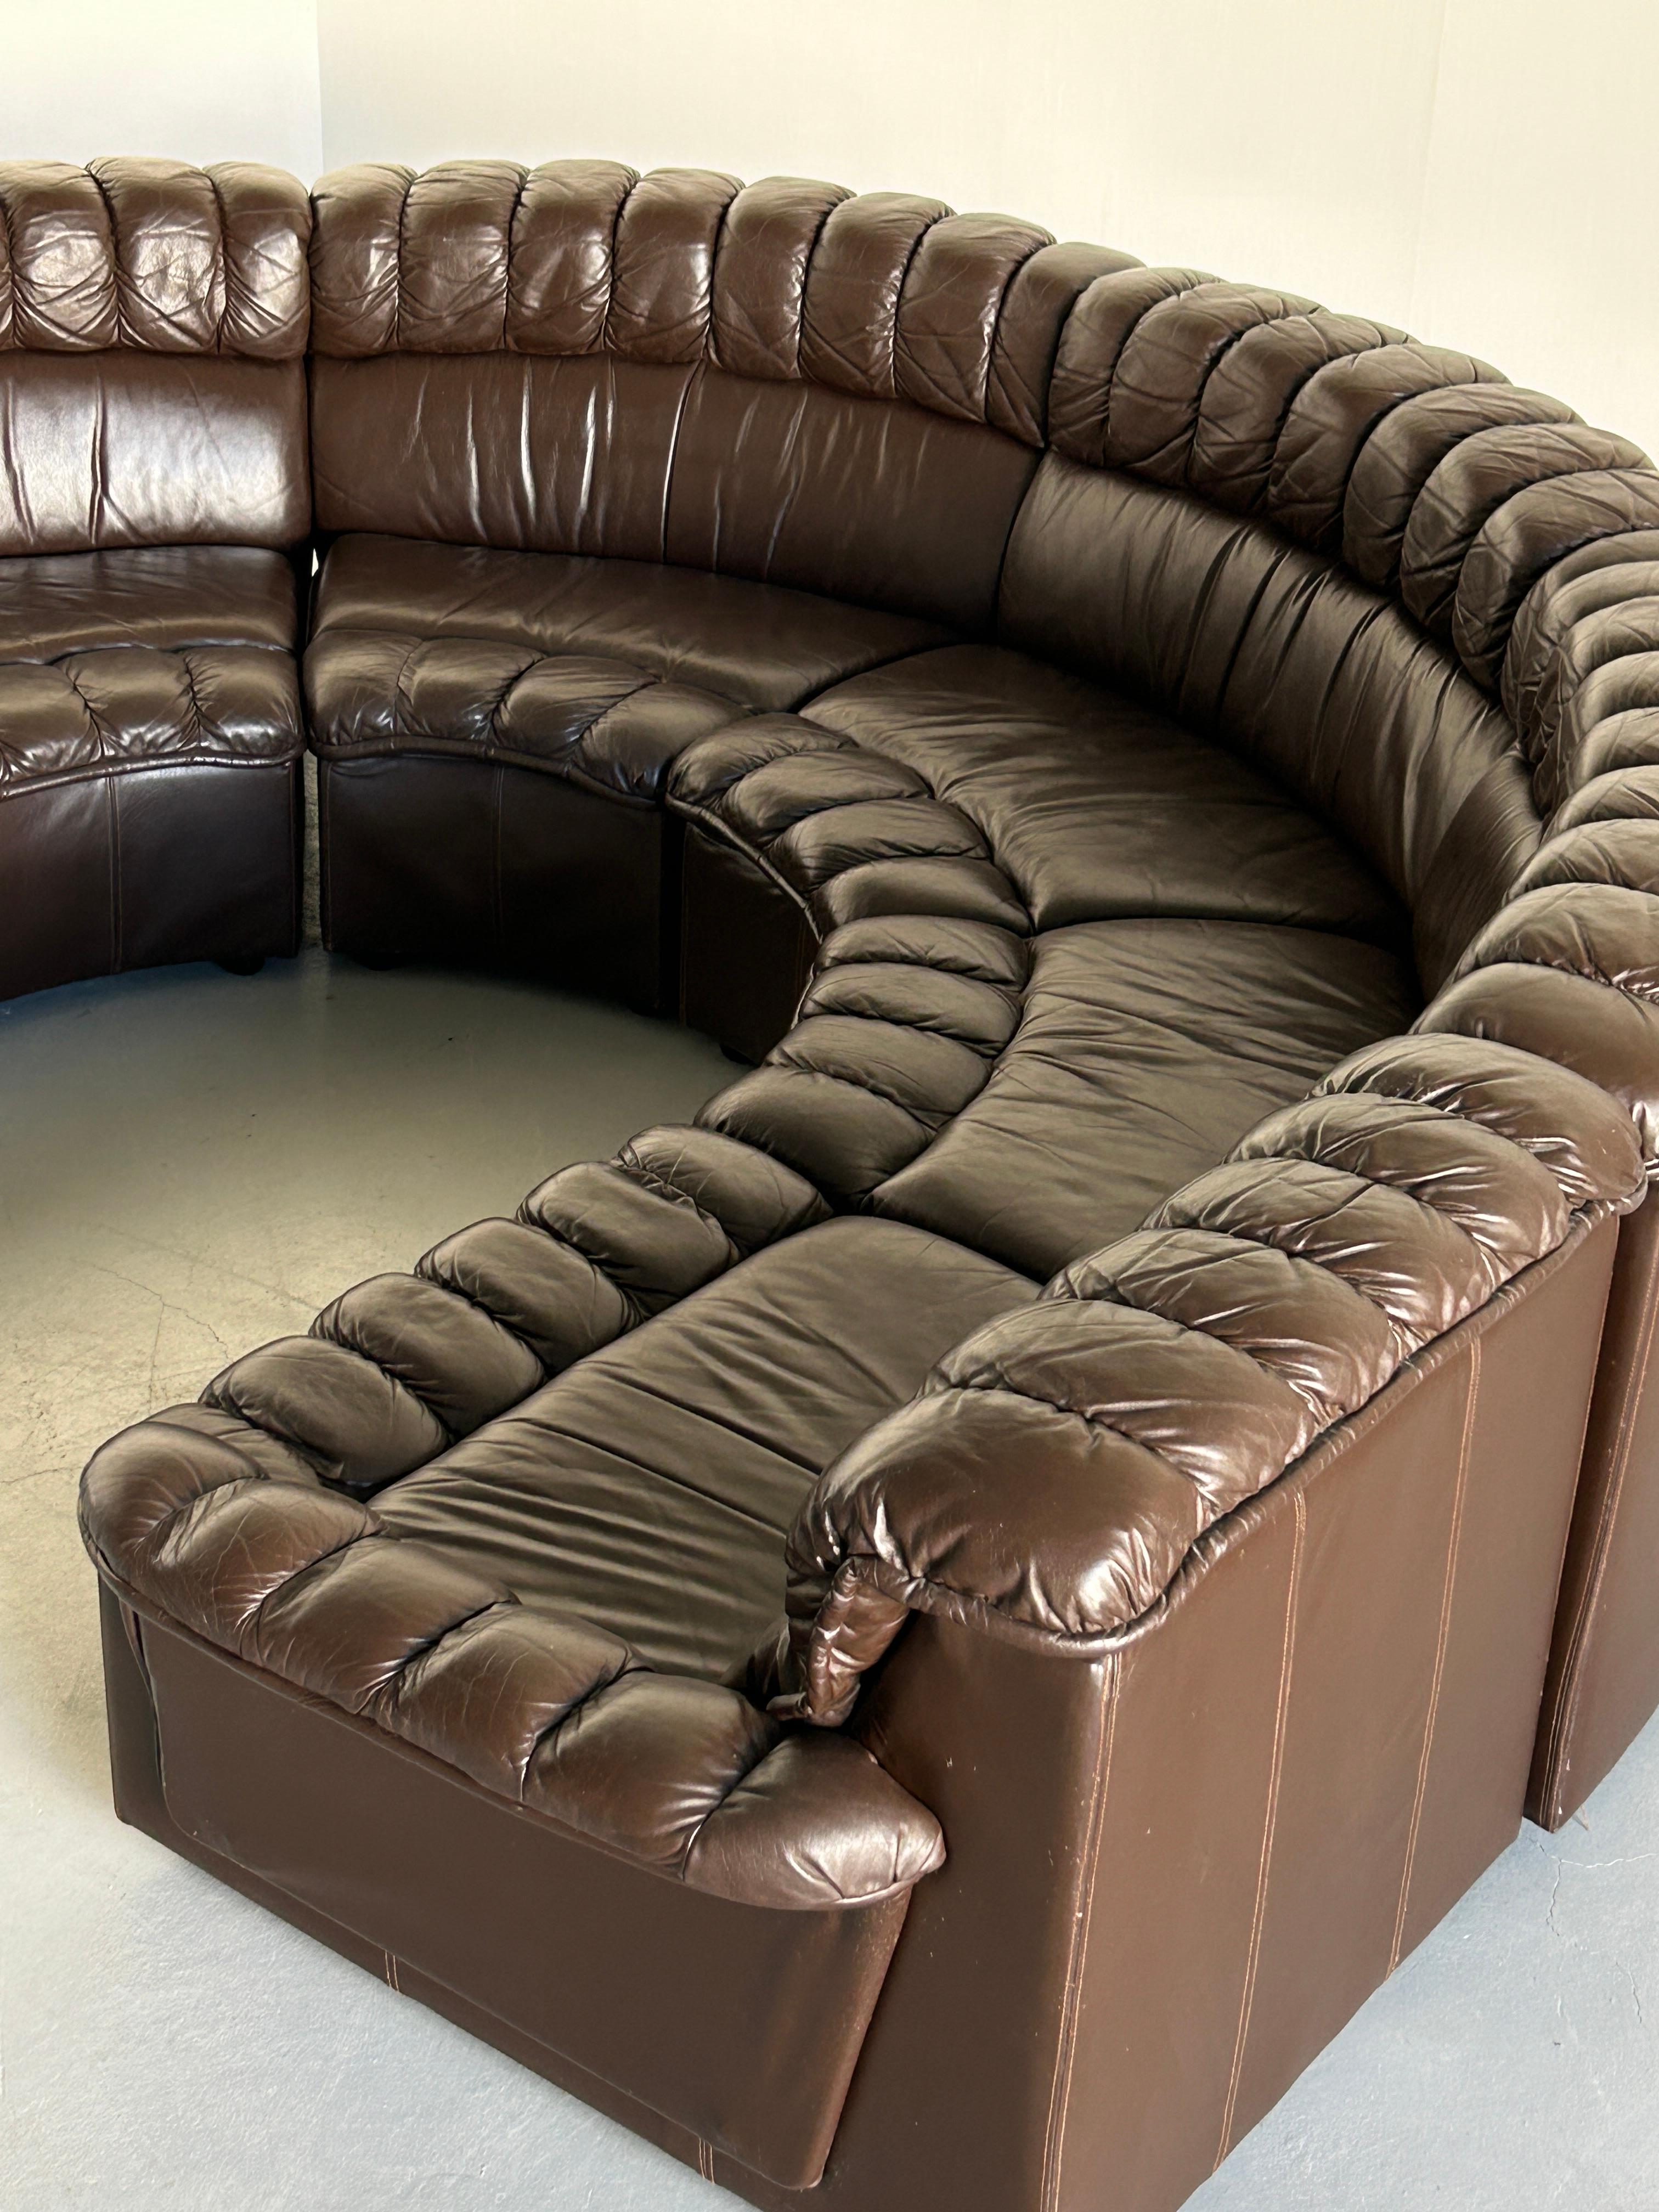 Mid-Century-Modern Leather Snake Sofa in style of De Sede DS-600 Non-Stop, 1970s For Sale 9